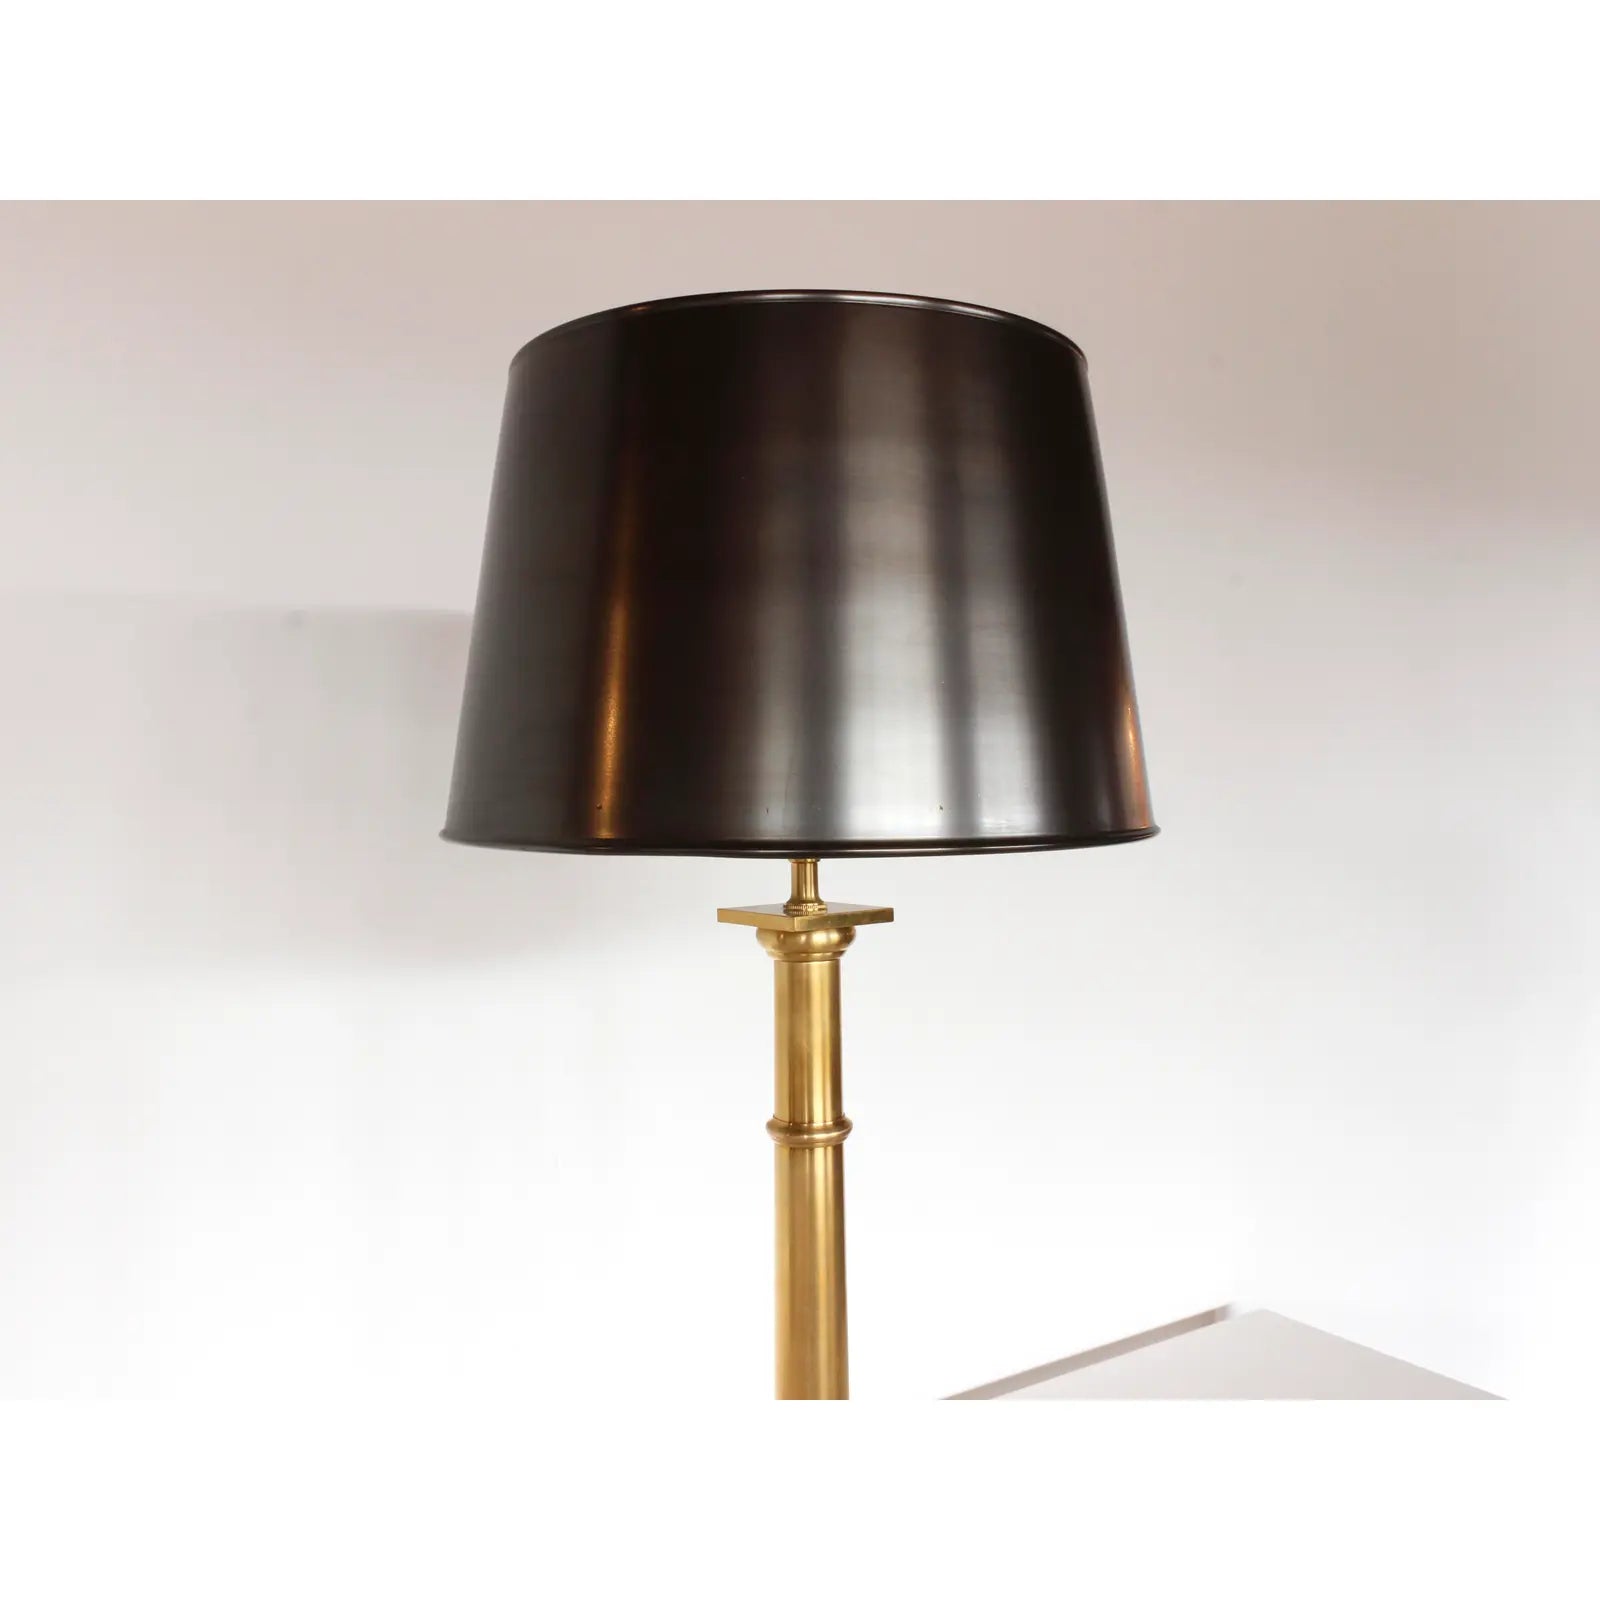 Tall Brass Tube Table Lamp With Black Shade -  Ireland